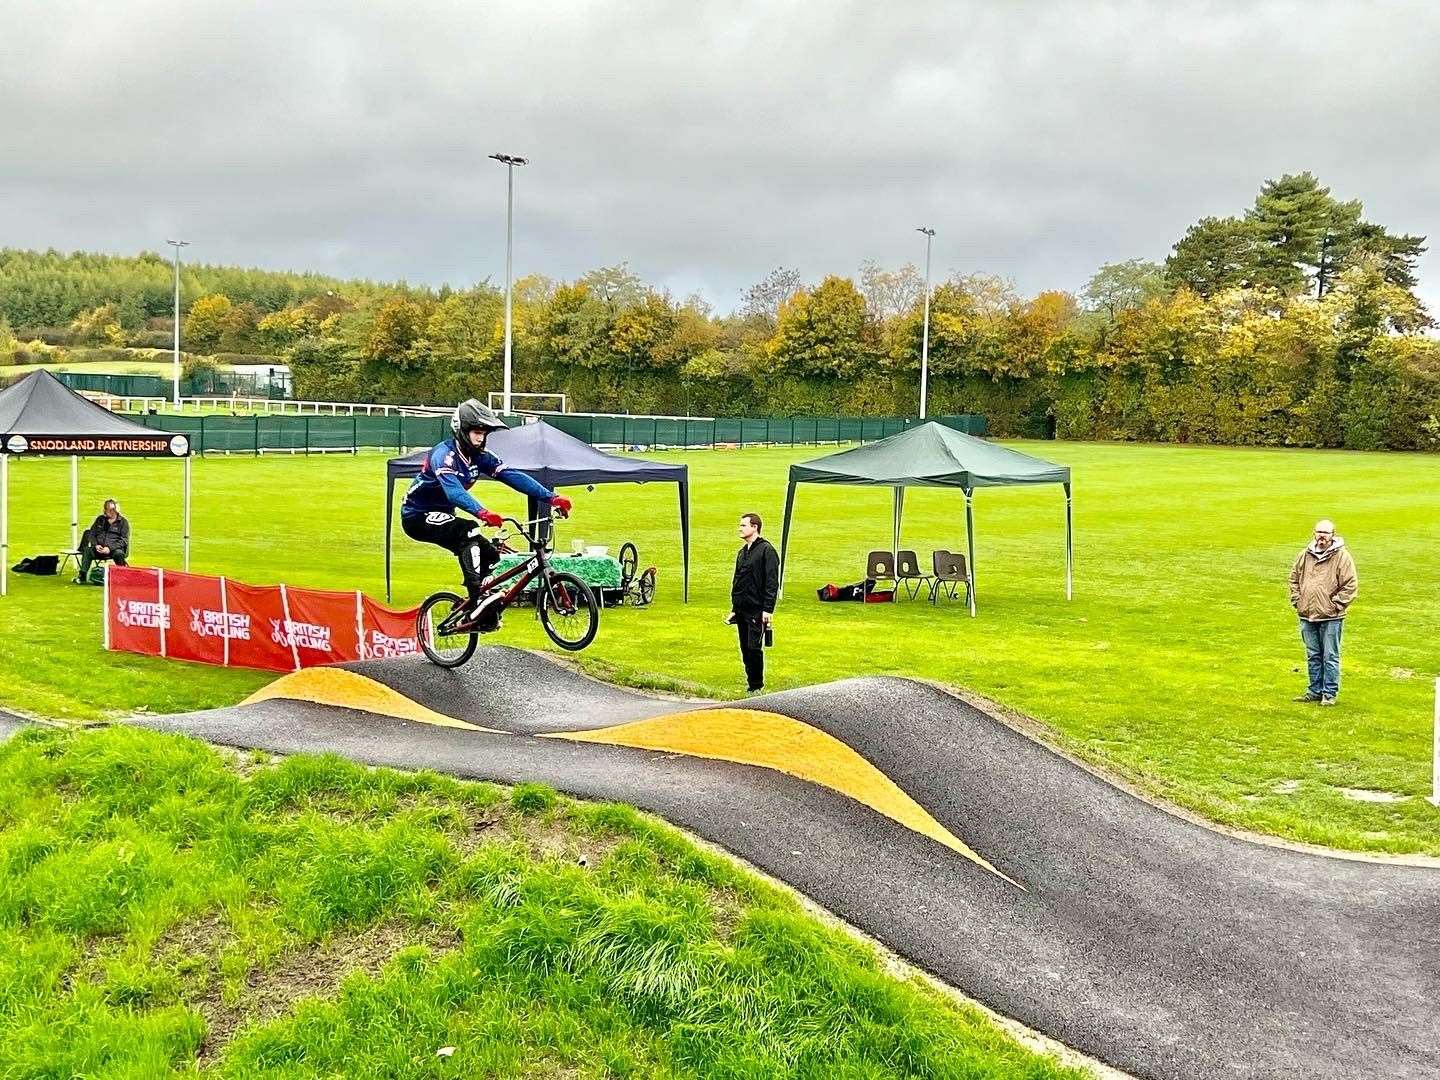 The new BMX pump track opened on October 6